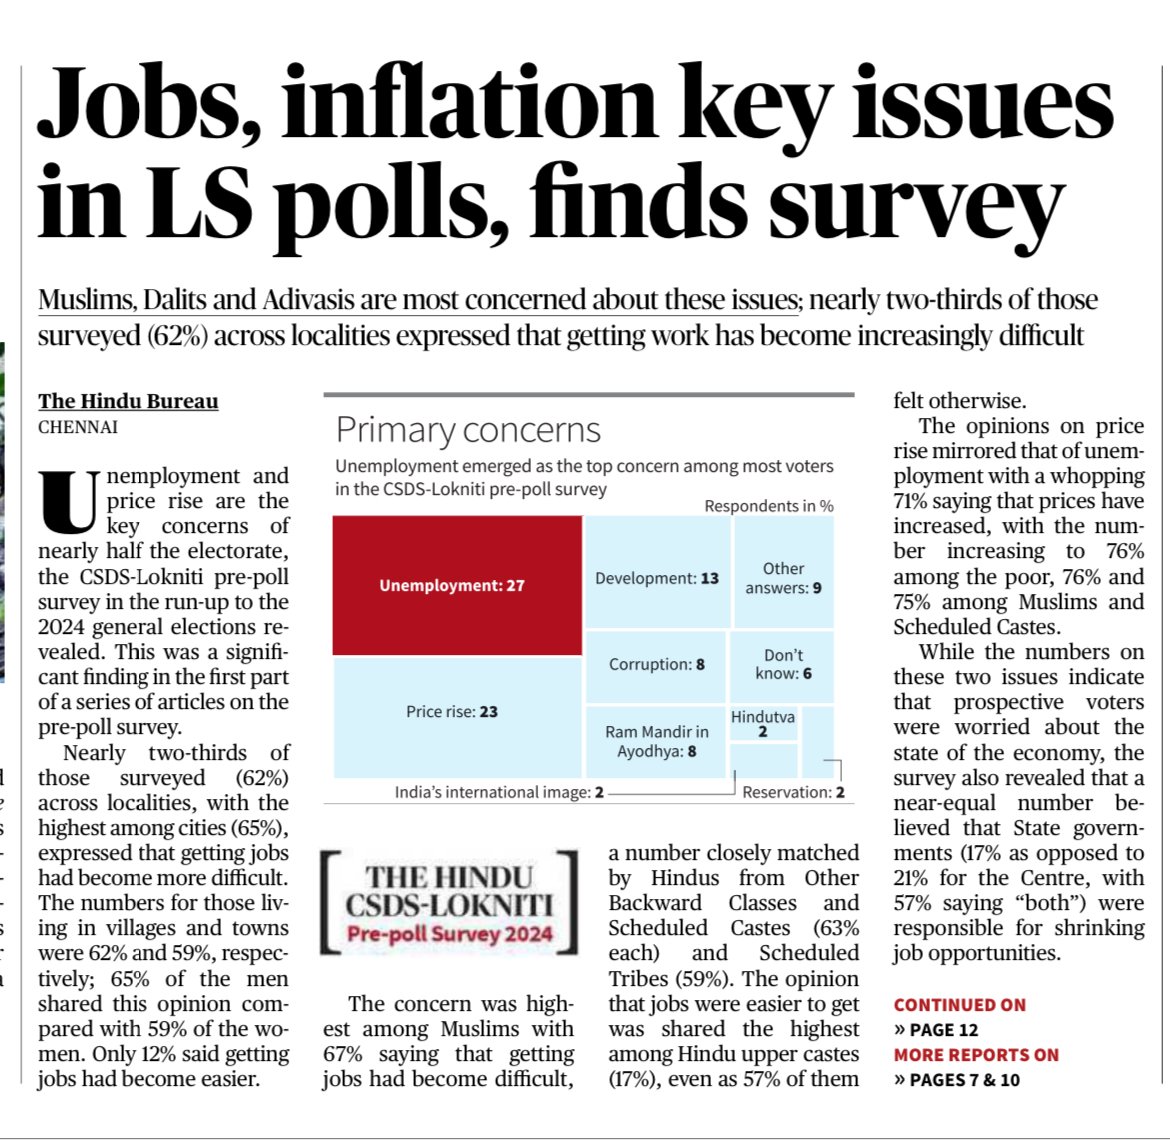 That's why the PM is harping on Muslim League and Ram Temple, not on his track record on unemployment and price rise in the last 10 years. Finally, a newspaper puts this as the front-page main lead, that too based on a reputed national survey.